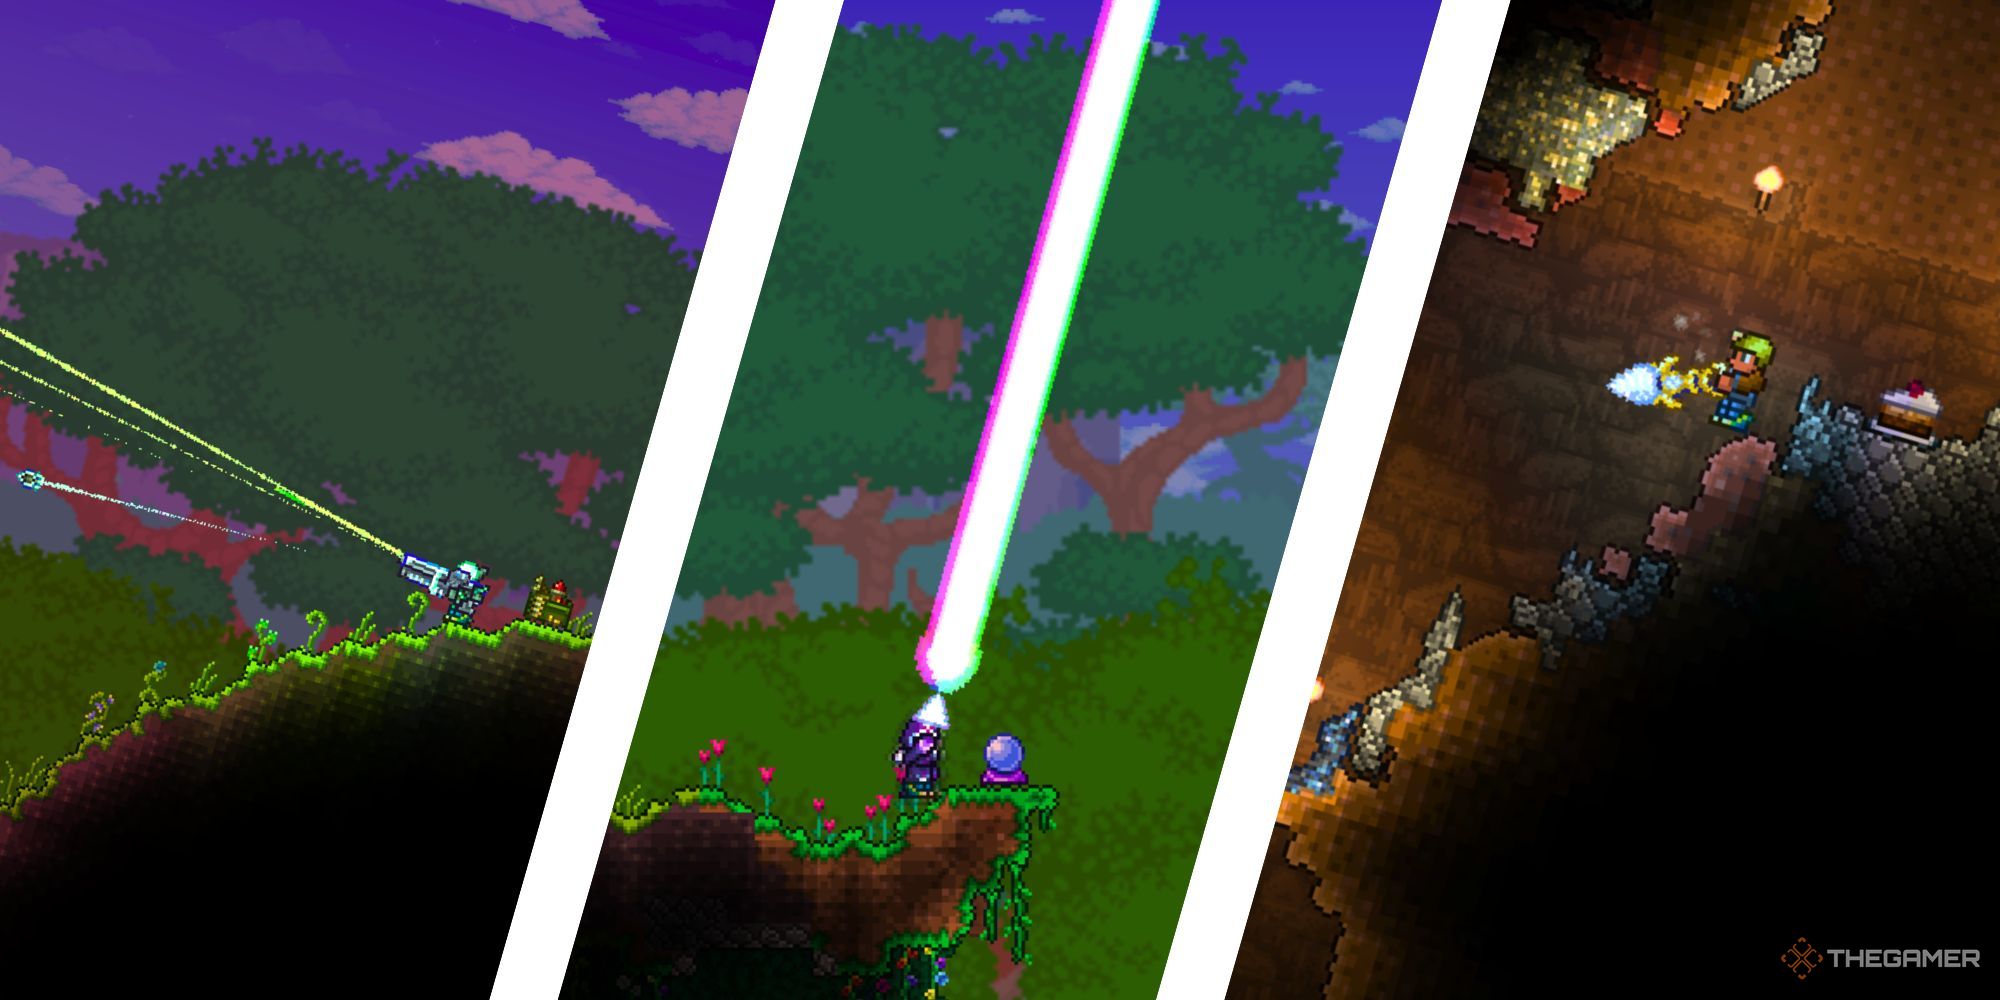 A diagonally split image showing green bullets being fired, a prismatic energy beam shot into the sky, and a miner in a cave with a glowing drill.